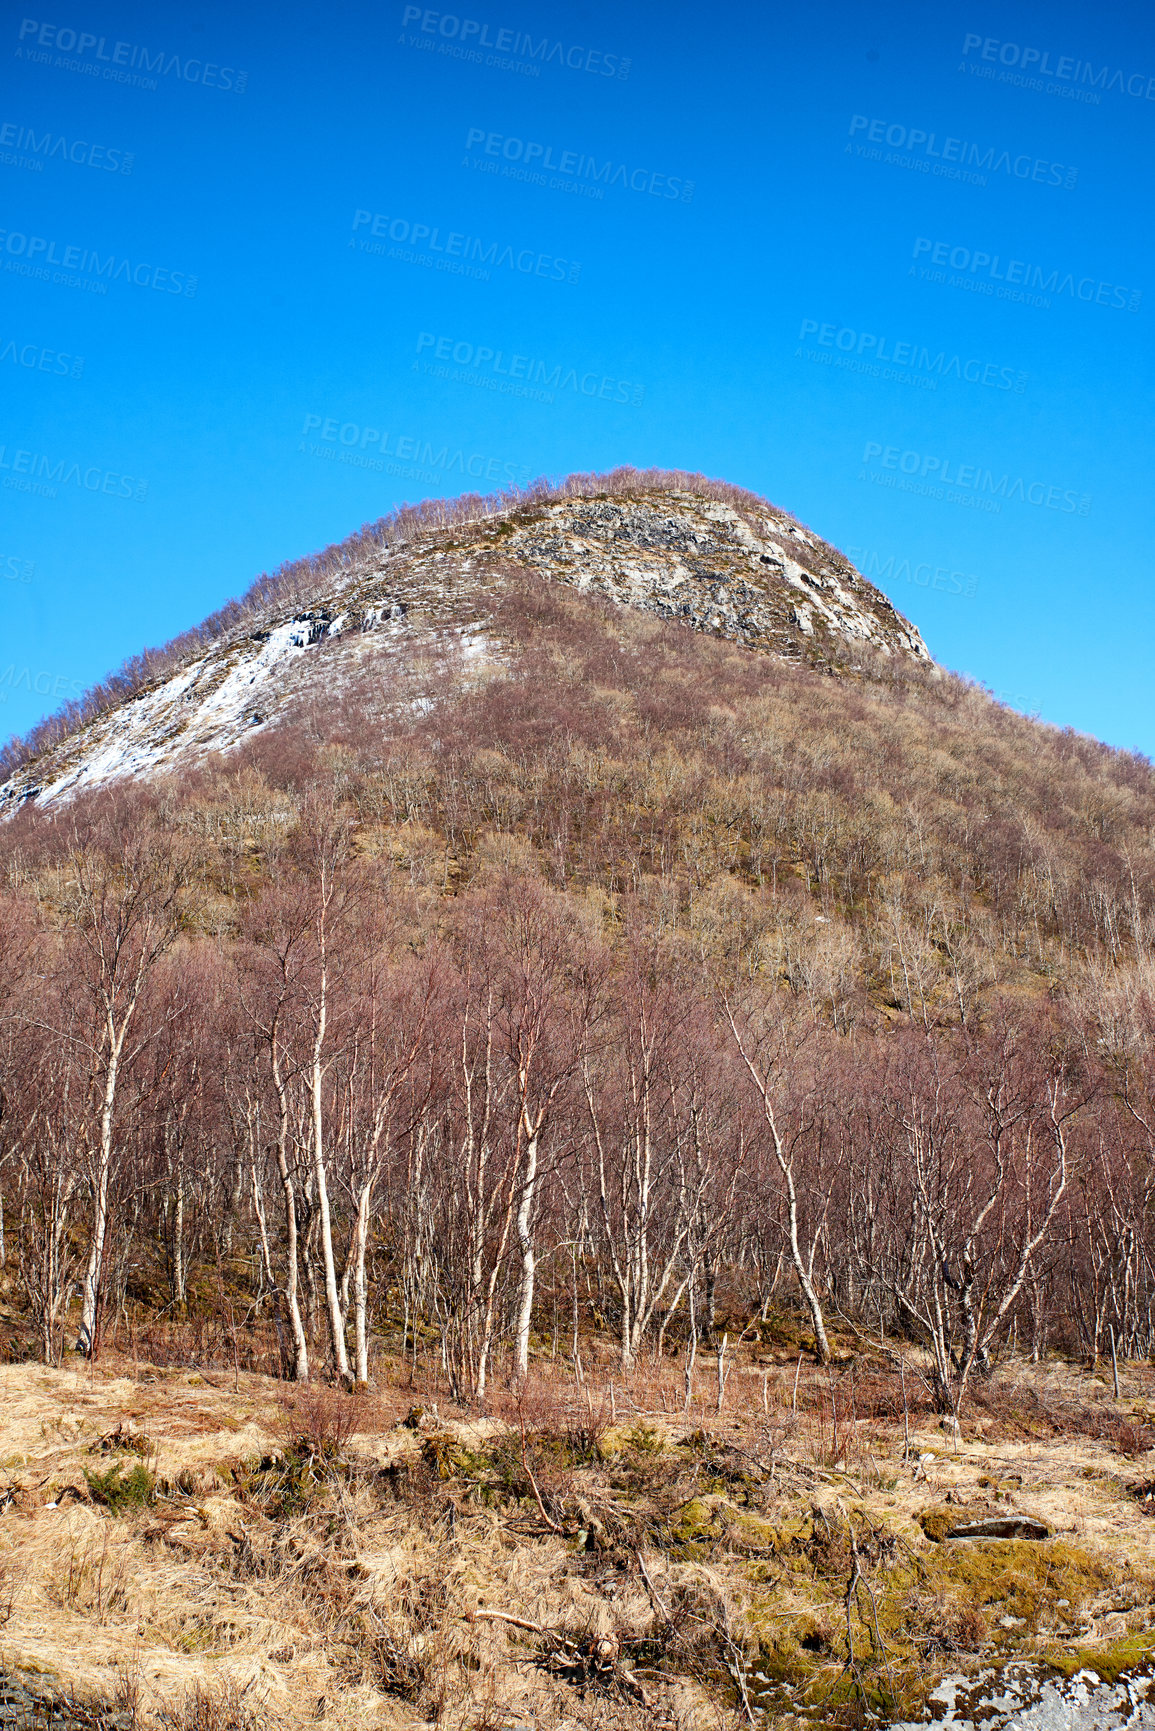 Buy stock photo A forest mountain with melting snow on a blue sky copy space. Rocky outcrops with snowy hilltops, dry trees and wild bushes in early spring. Nature view of hills with regrowth after winter